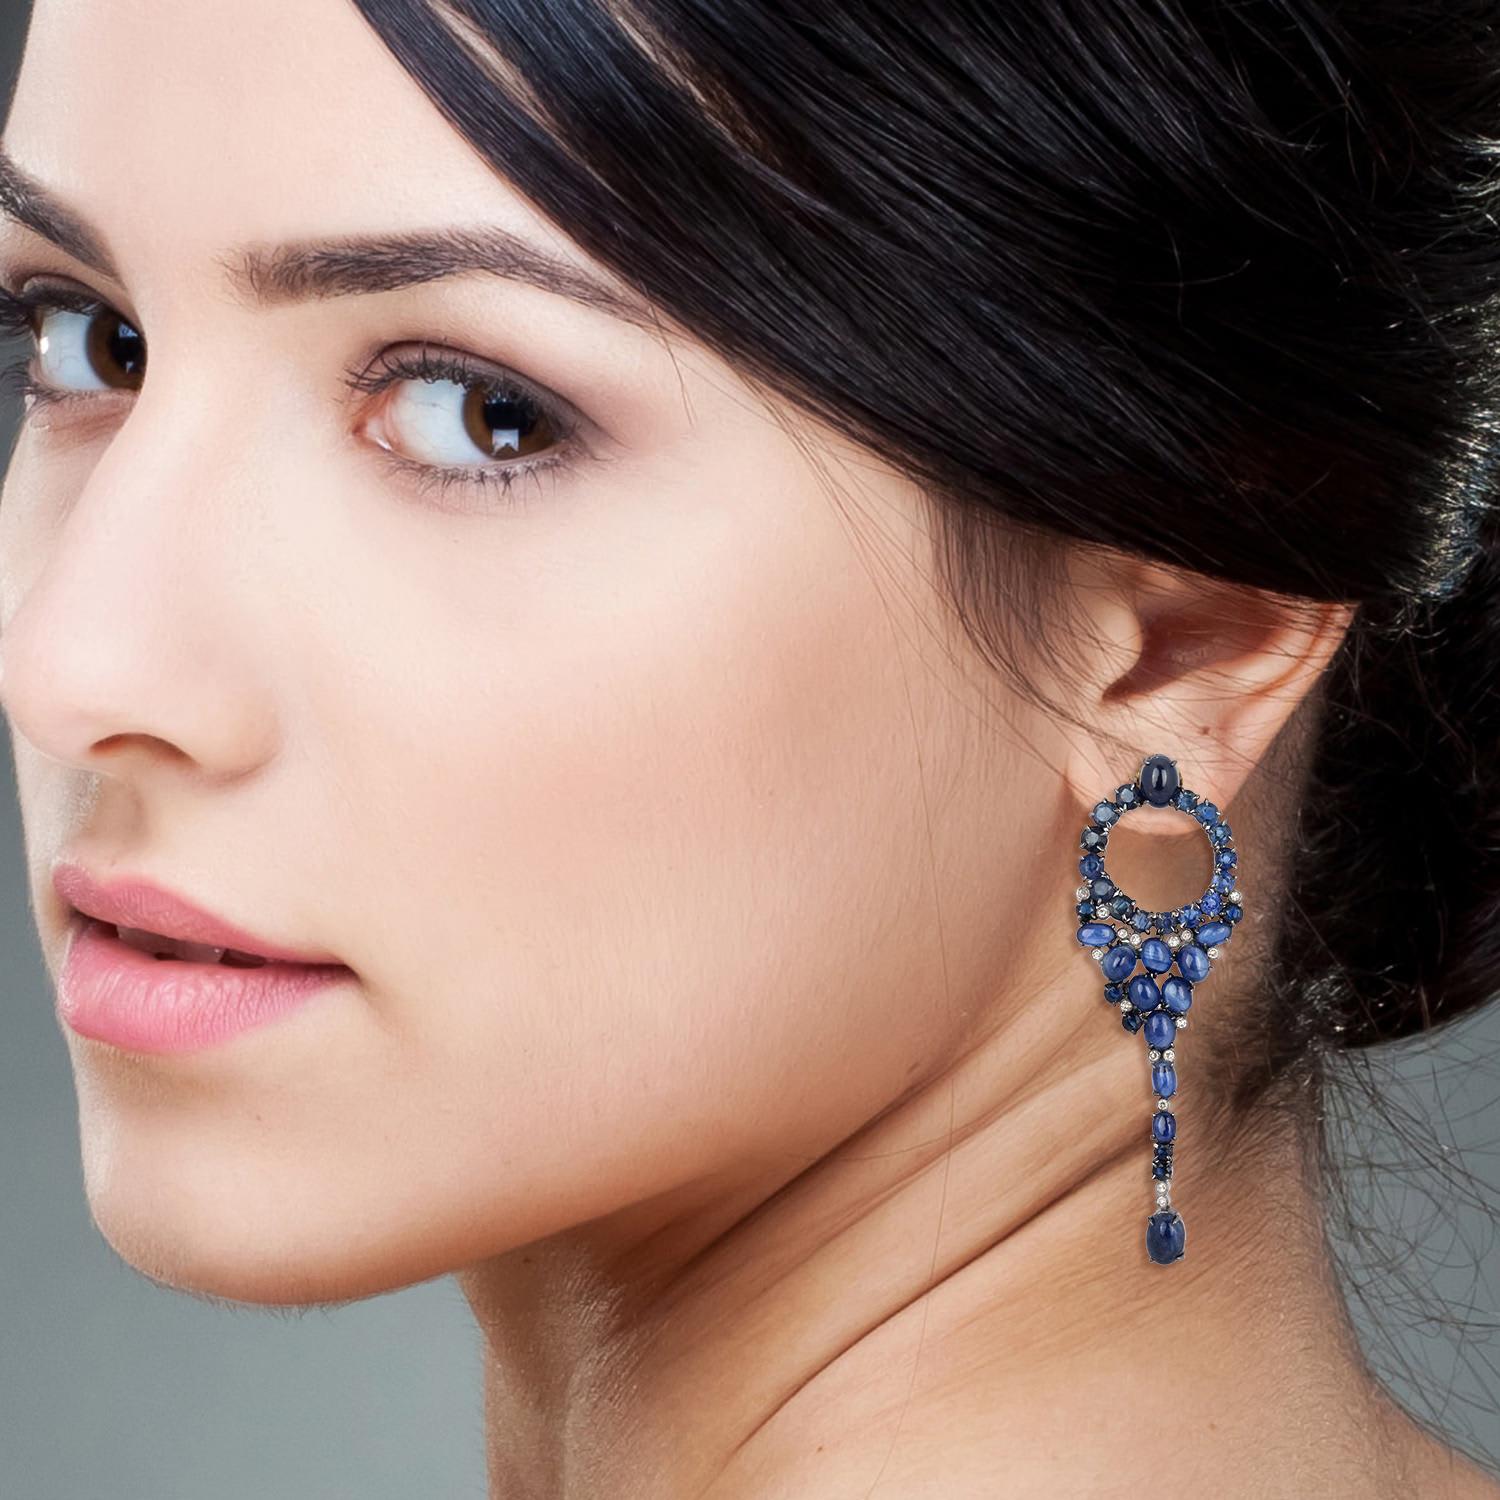 Cast in 18-karat gold & sterling silver, these stunning drop earrings are set with 20.53 carats blue sapphire and .18 carats of sparkling diamonds. 

FOLLOW  MEGHNA JEWELS storefront to view the latest collection & exclusive pieces.  Meghna Jewels